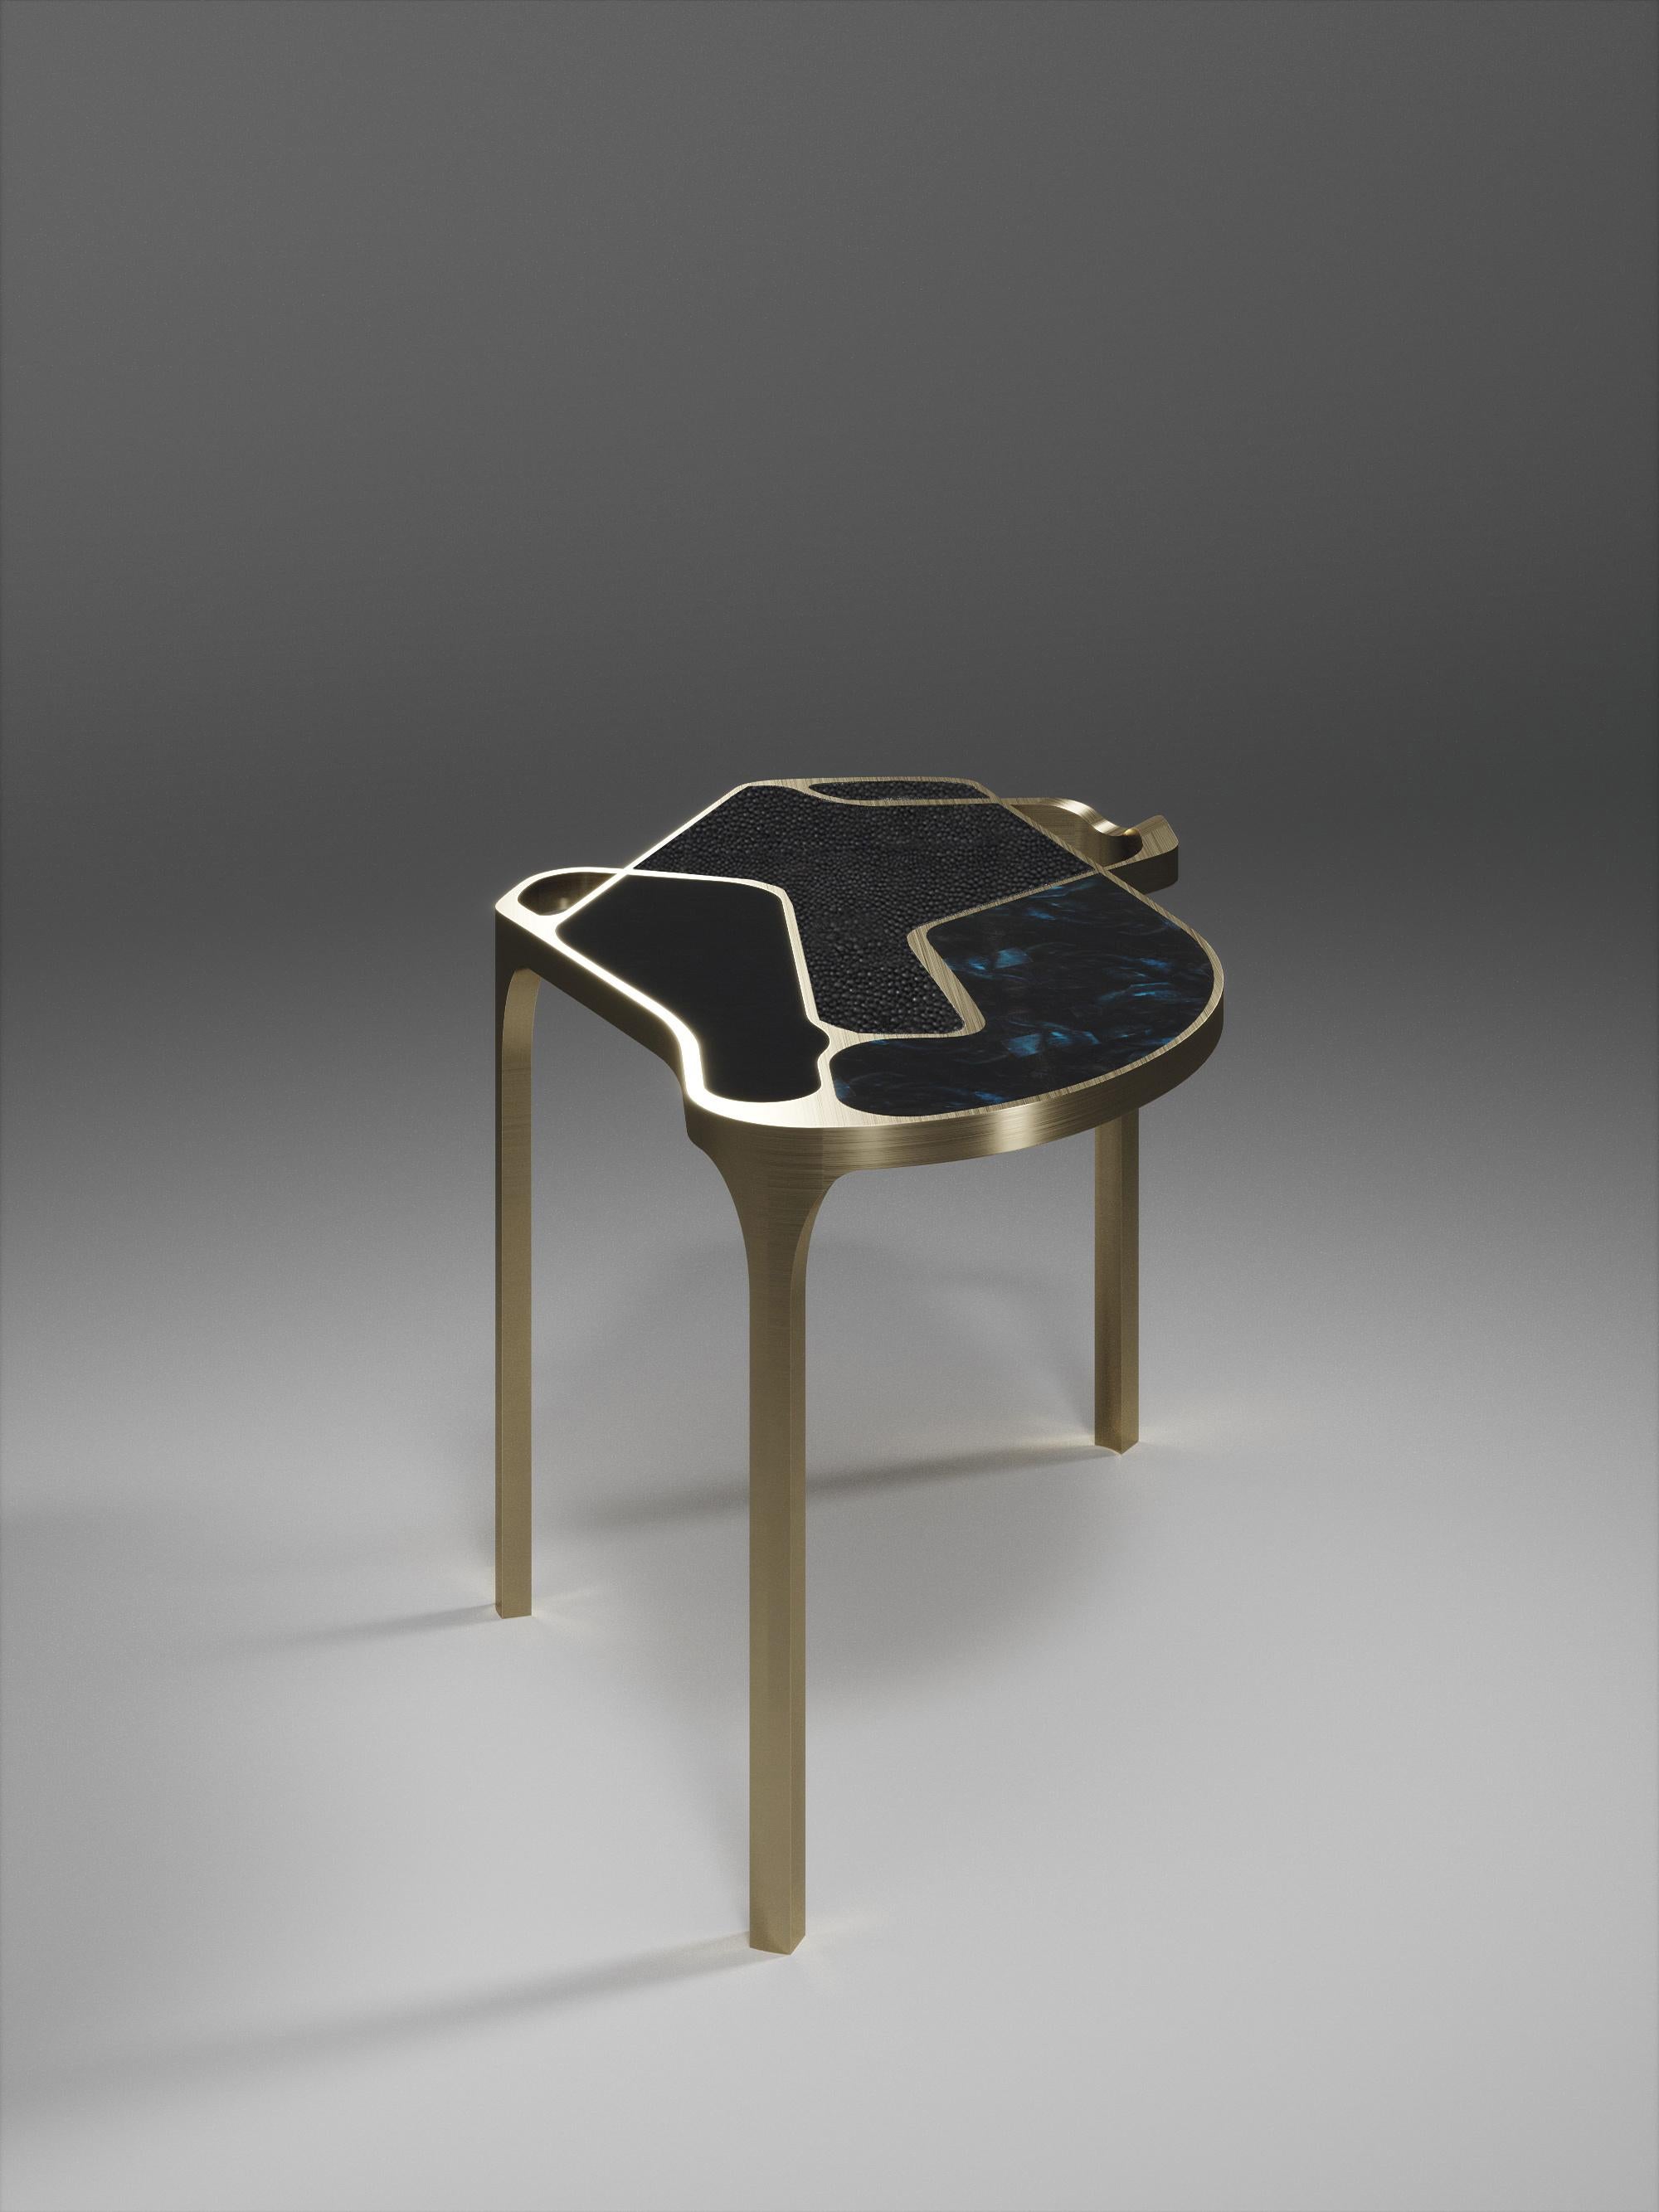 The Cocteau II coffee table by R&Y Augousti is a truly one of a kind piece. The sculptural and ethereal piece has abstract forms, shapes and figures within it that one could interpret in different ways. The bronze-patina brass inserts in the coal